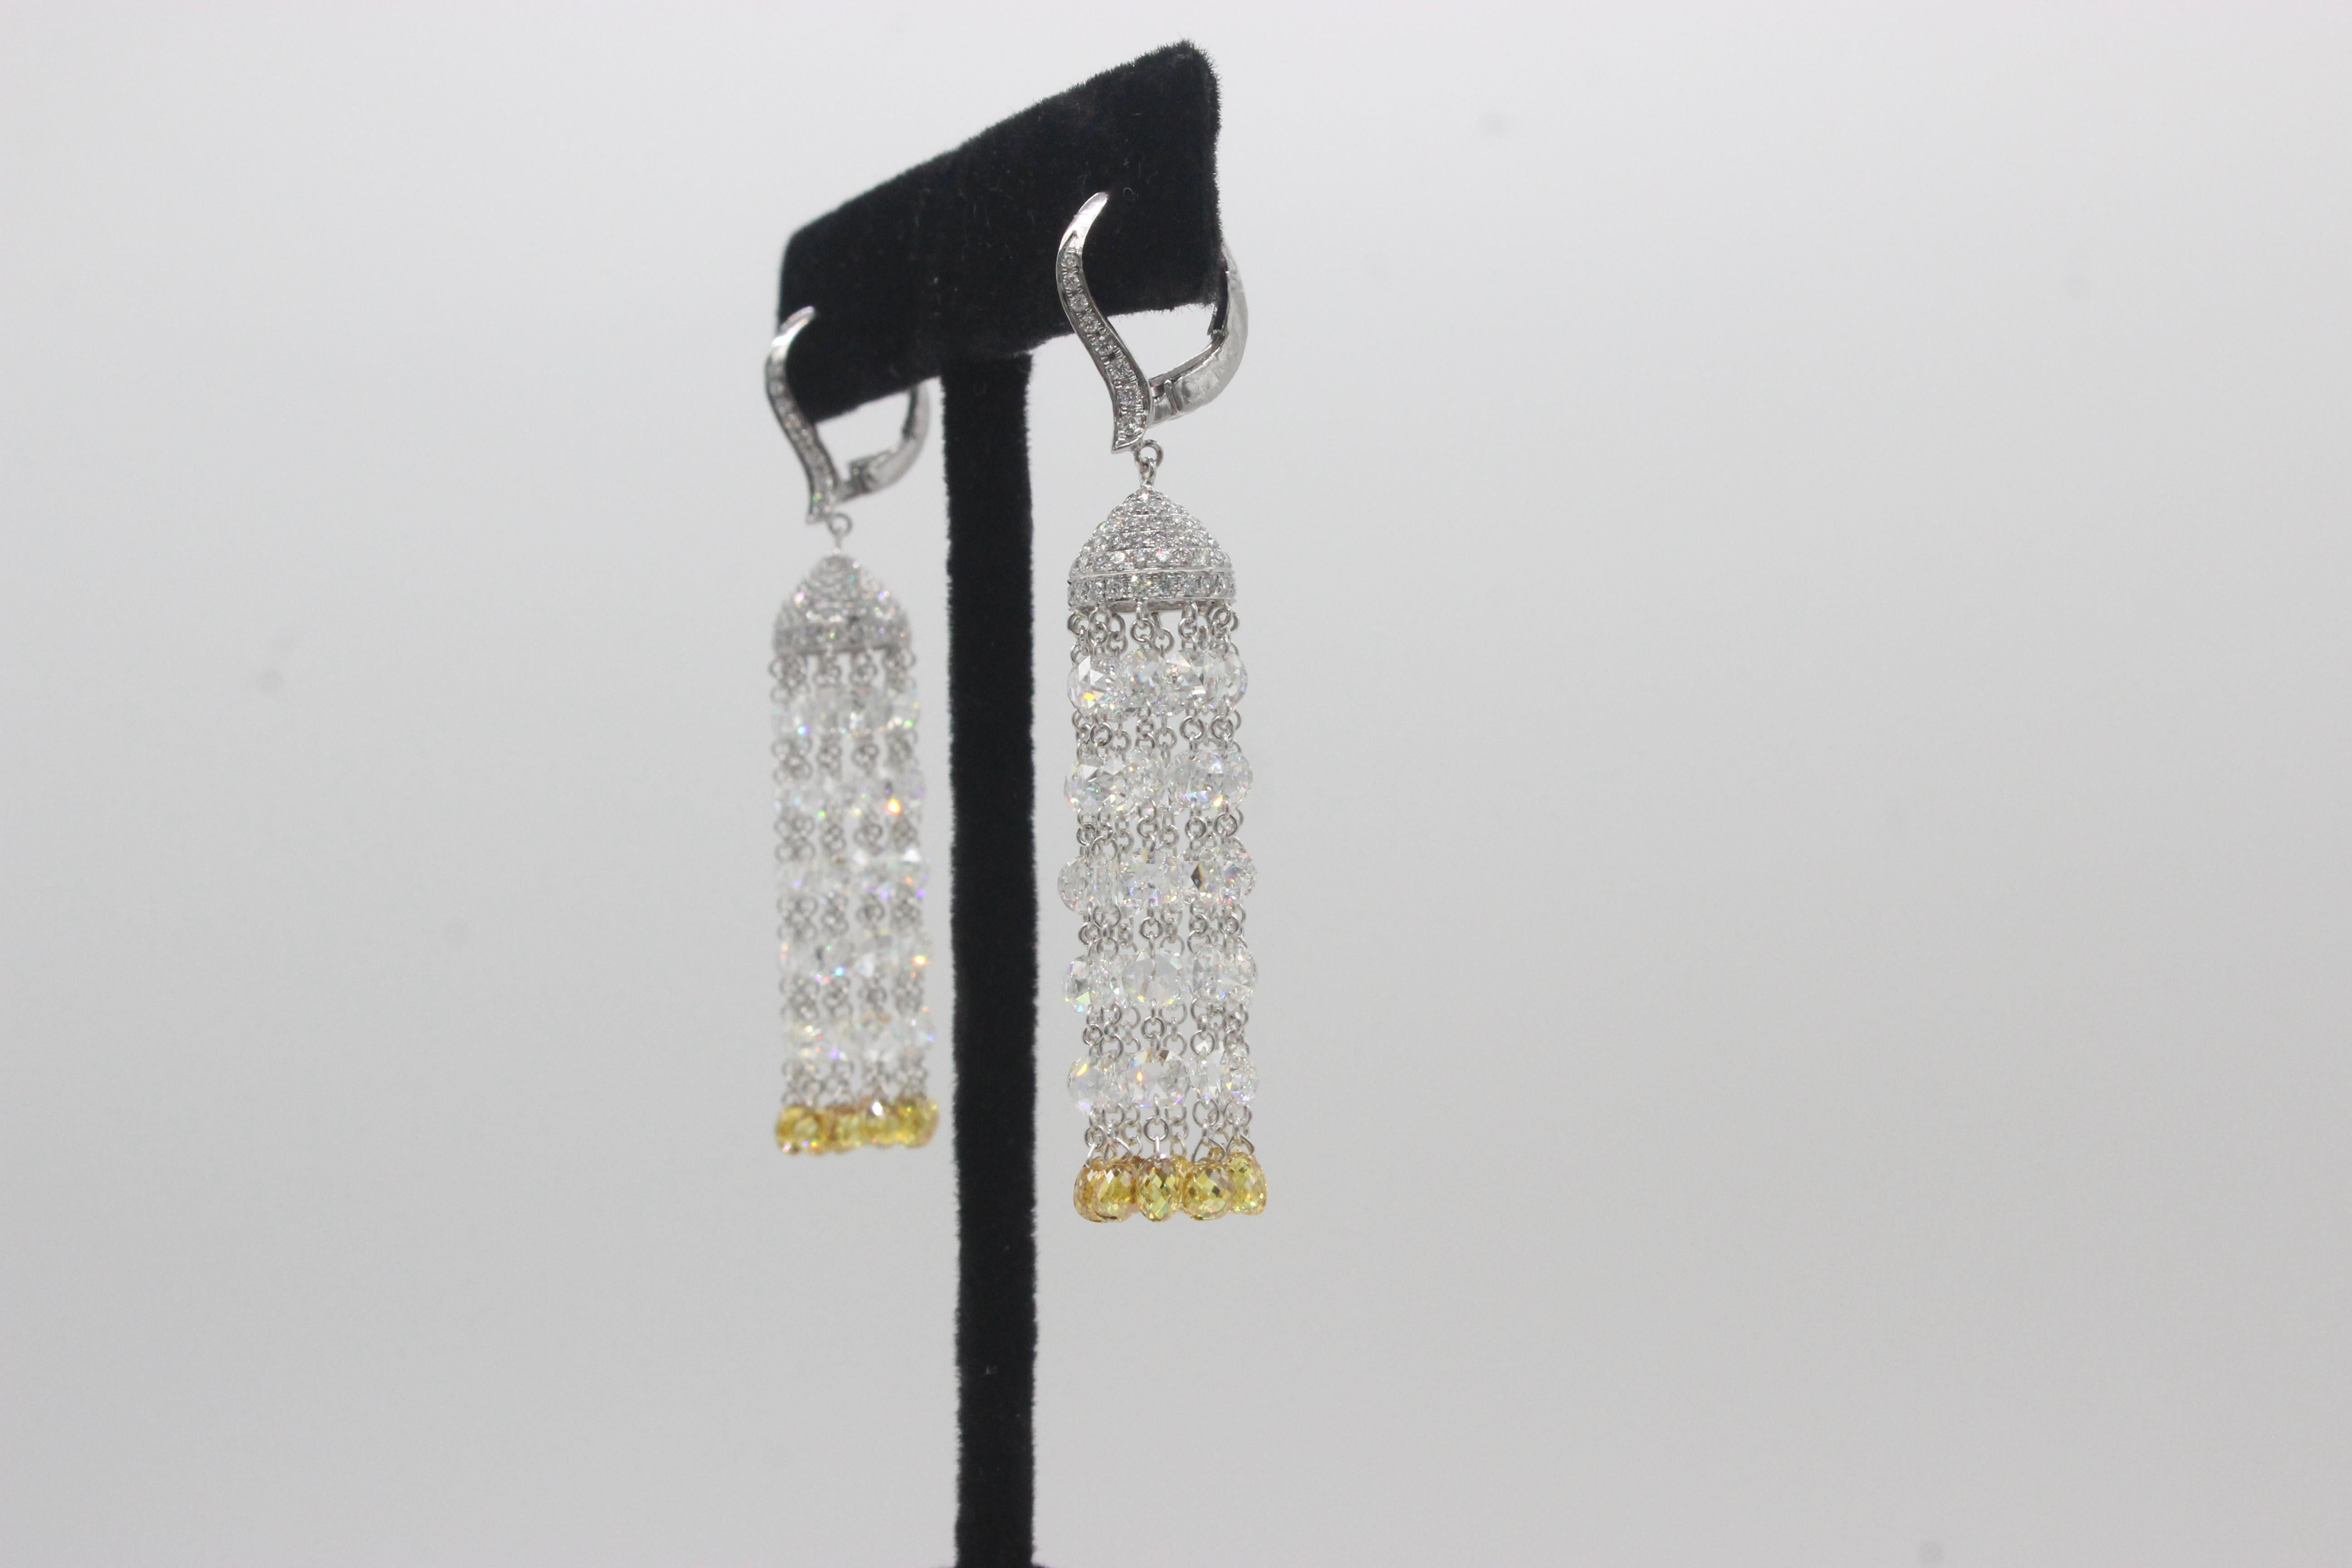 PANIM Diamond Rosecut & Fancy Color Briolette 18K White Gold Tassel Earrings

Offering modern women the perfect cure to diamond envy with a unique provocative take on fine jewellery these 18kt white gold tassel earrings comprise of 14.84 carats of